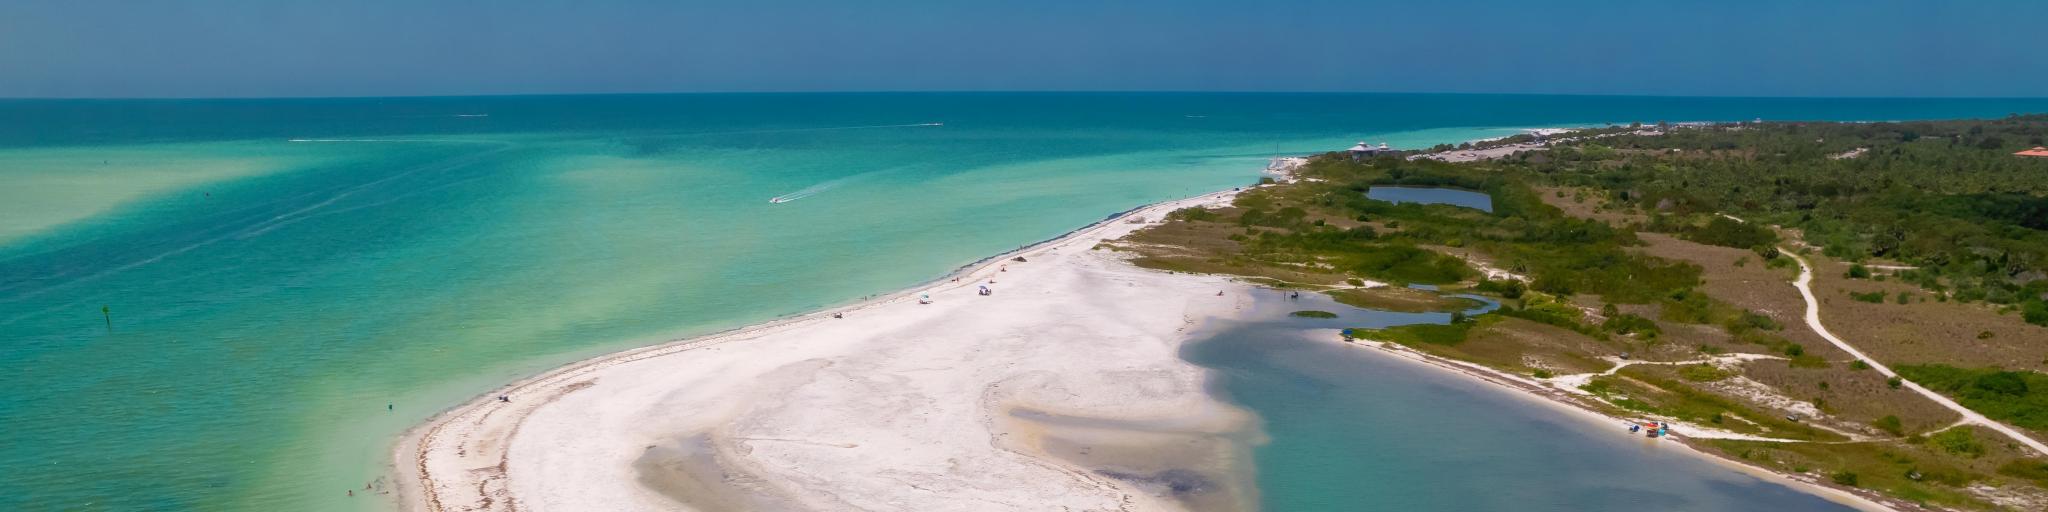 Florida beach. Paradise Summer vacation. Panorama of Caladesi island and Honeymoon Island State Park. Blue-turquoise color of salt water. Ocean or Gulf of Mexico. Tropical Nature. America. Aerial view